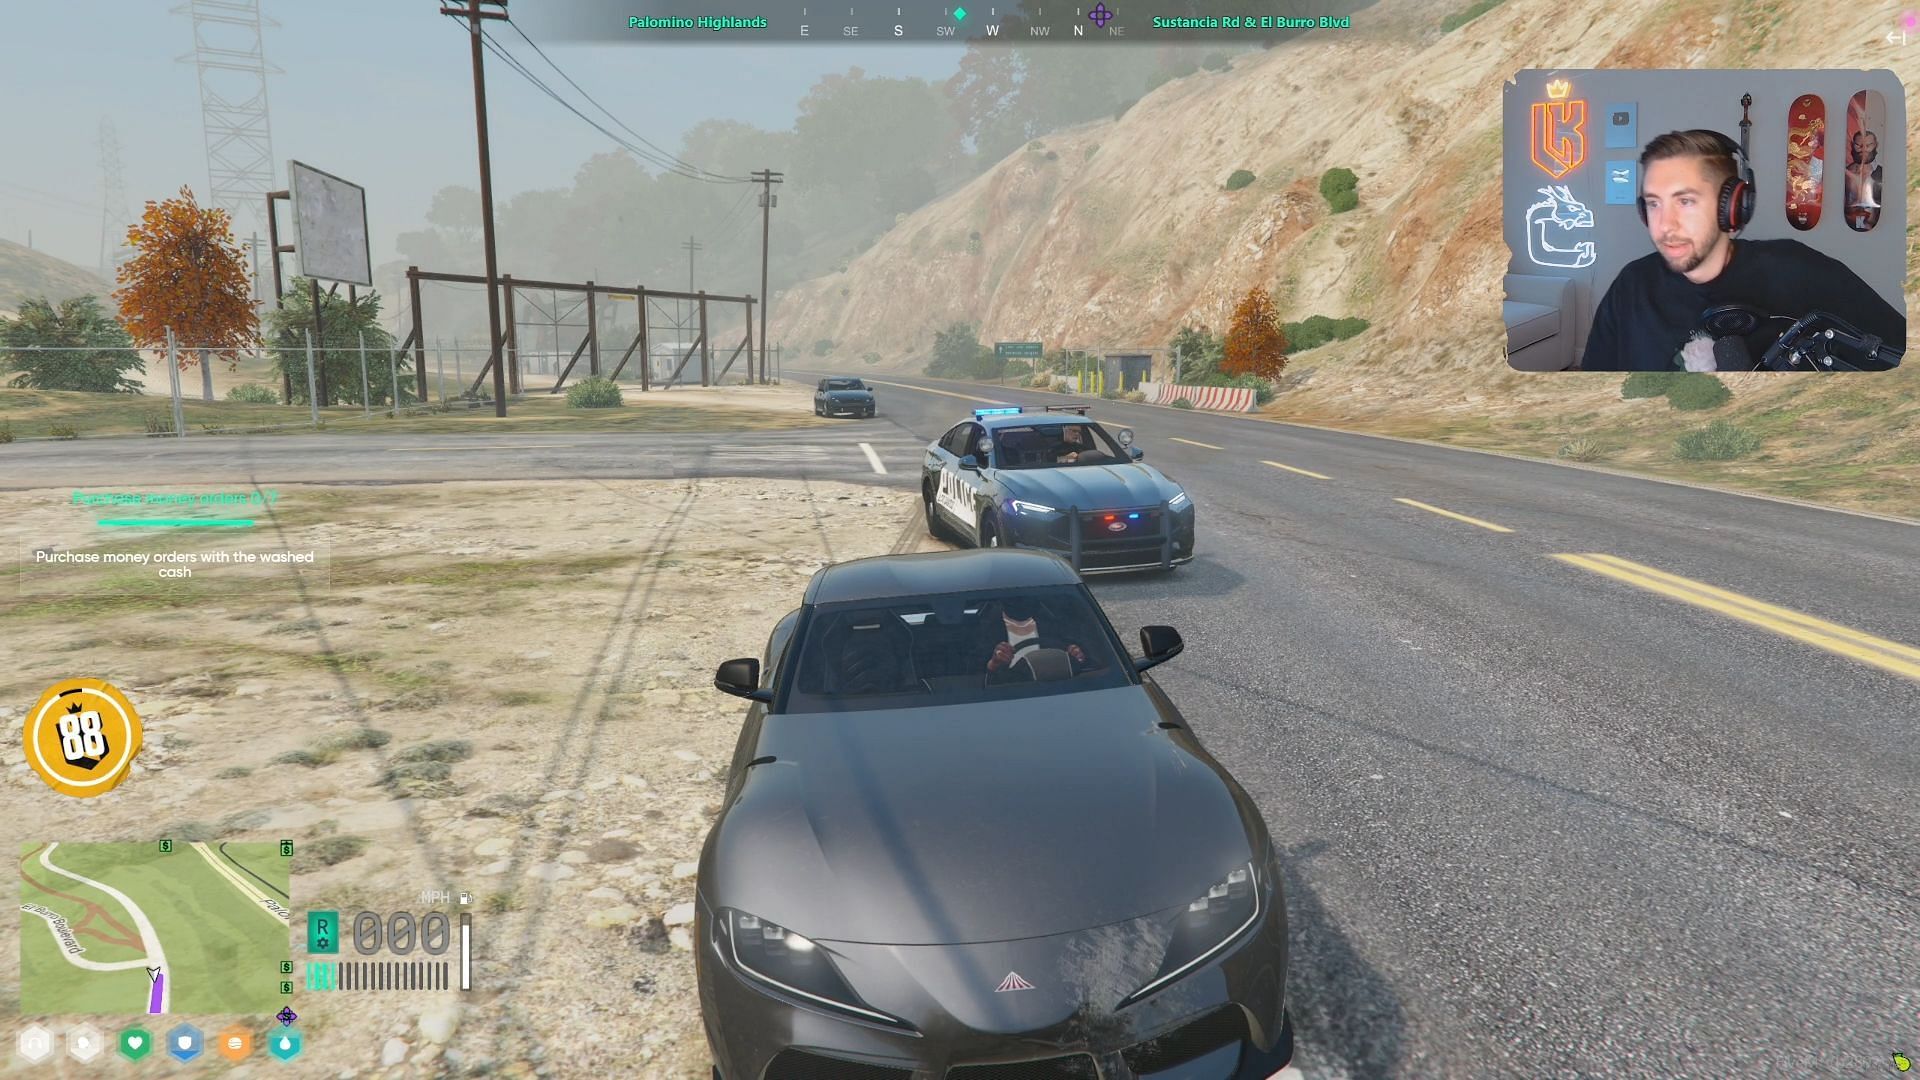 Lord_Kebun is one of the well-known GTA 5 RP streamers on Twitch (Image via Twitch/Lord_Kebun)